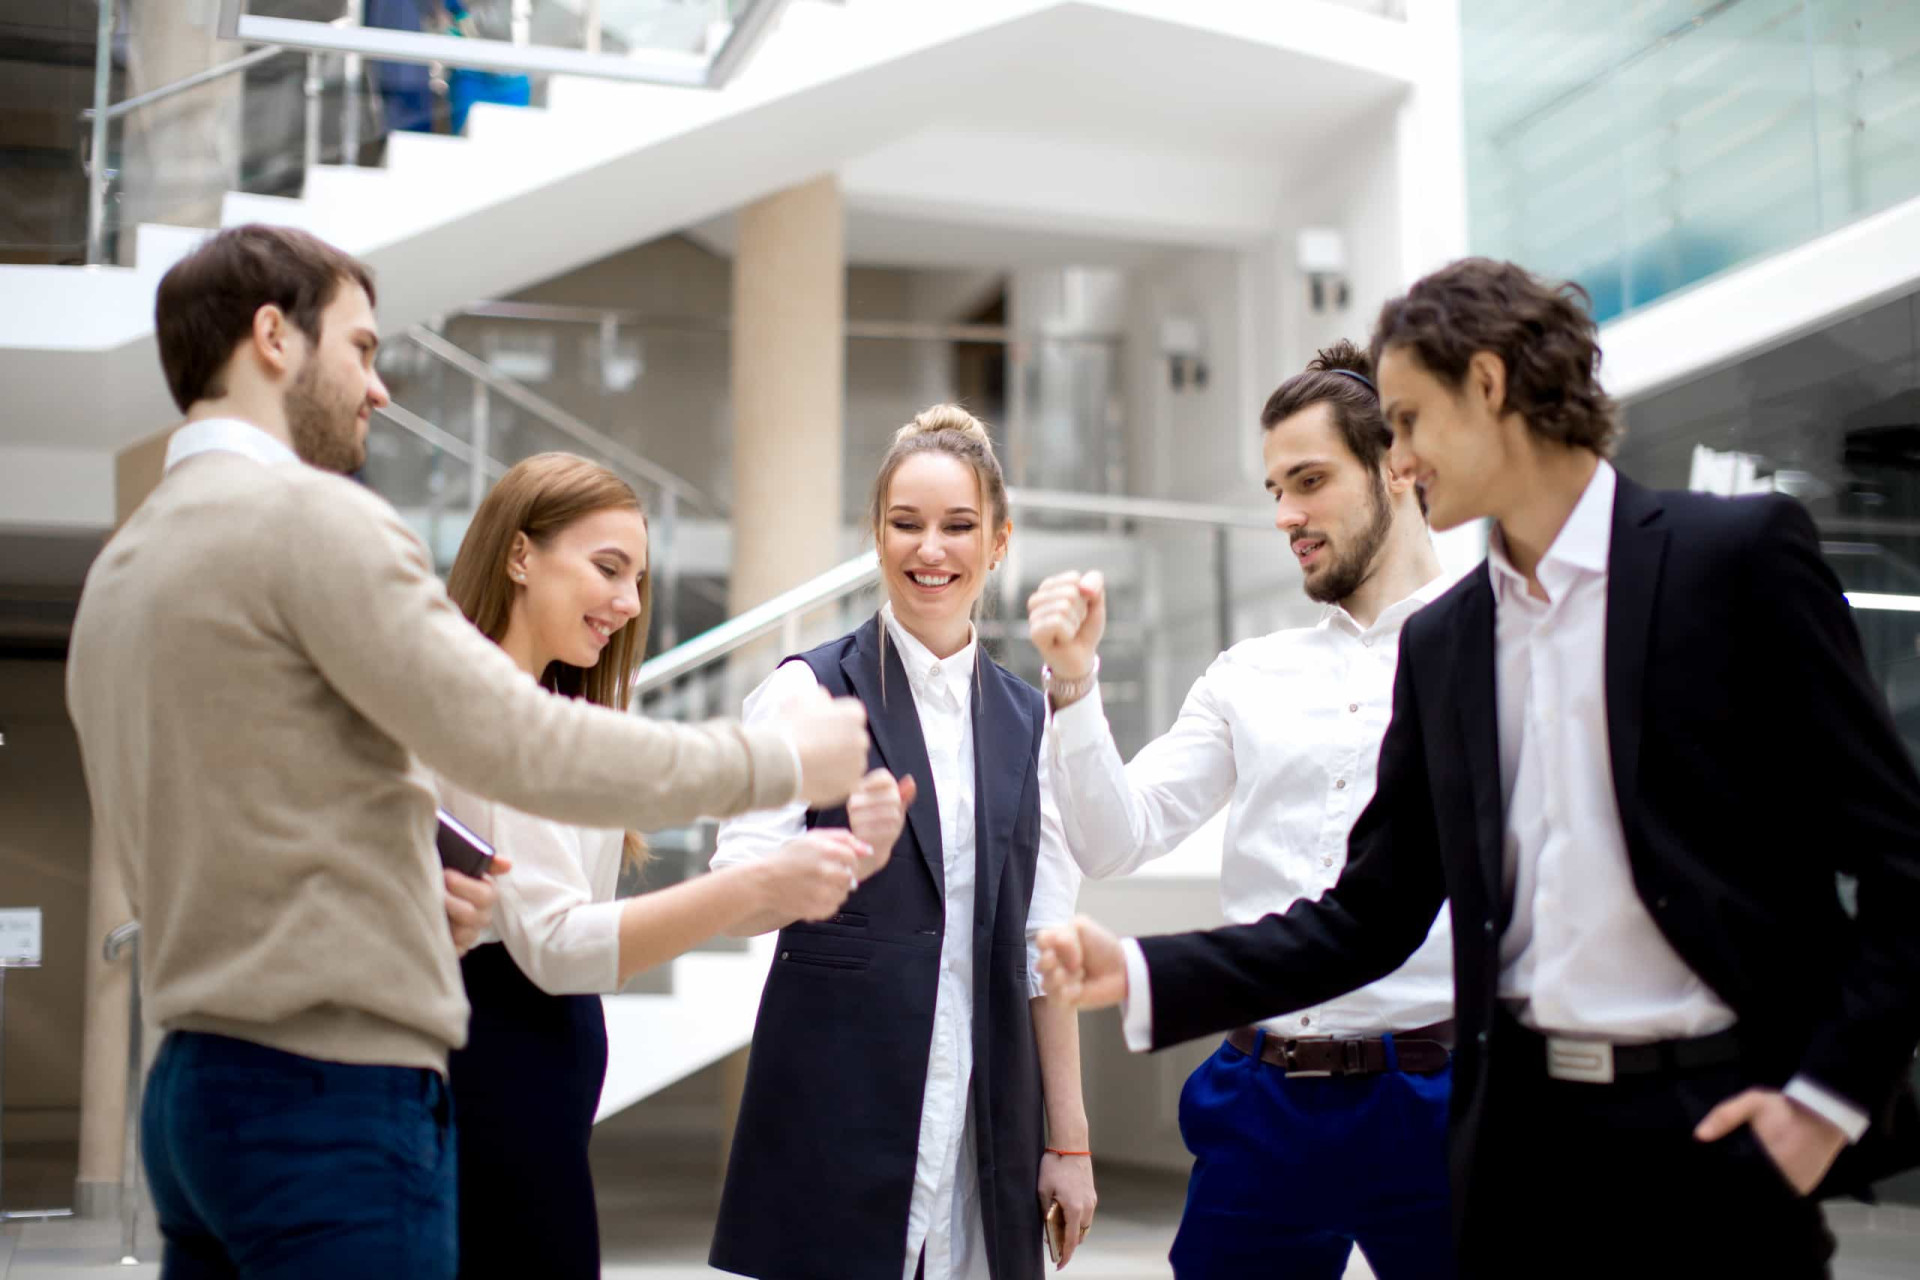 <p>Many team-building activities put on by companies have the aim of improving the critical thinking skills of employees.</p><p><a href="https://www.msn.com/en-nz/community/channel/vid-7xx8mnucu55yw63we9va2gwr7uihbxwc68fxqp25x6tg4ftibpra?cvid=94631541bc0f4f89bfd59158d696ad7e">Follow us and access great exclusive content every day</a></p>